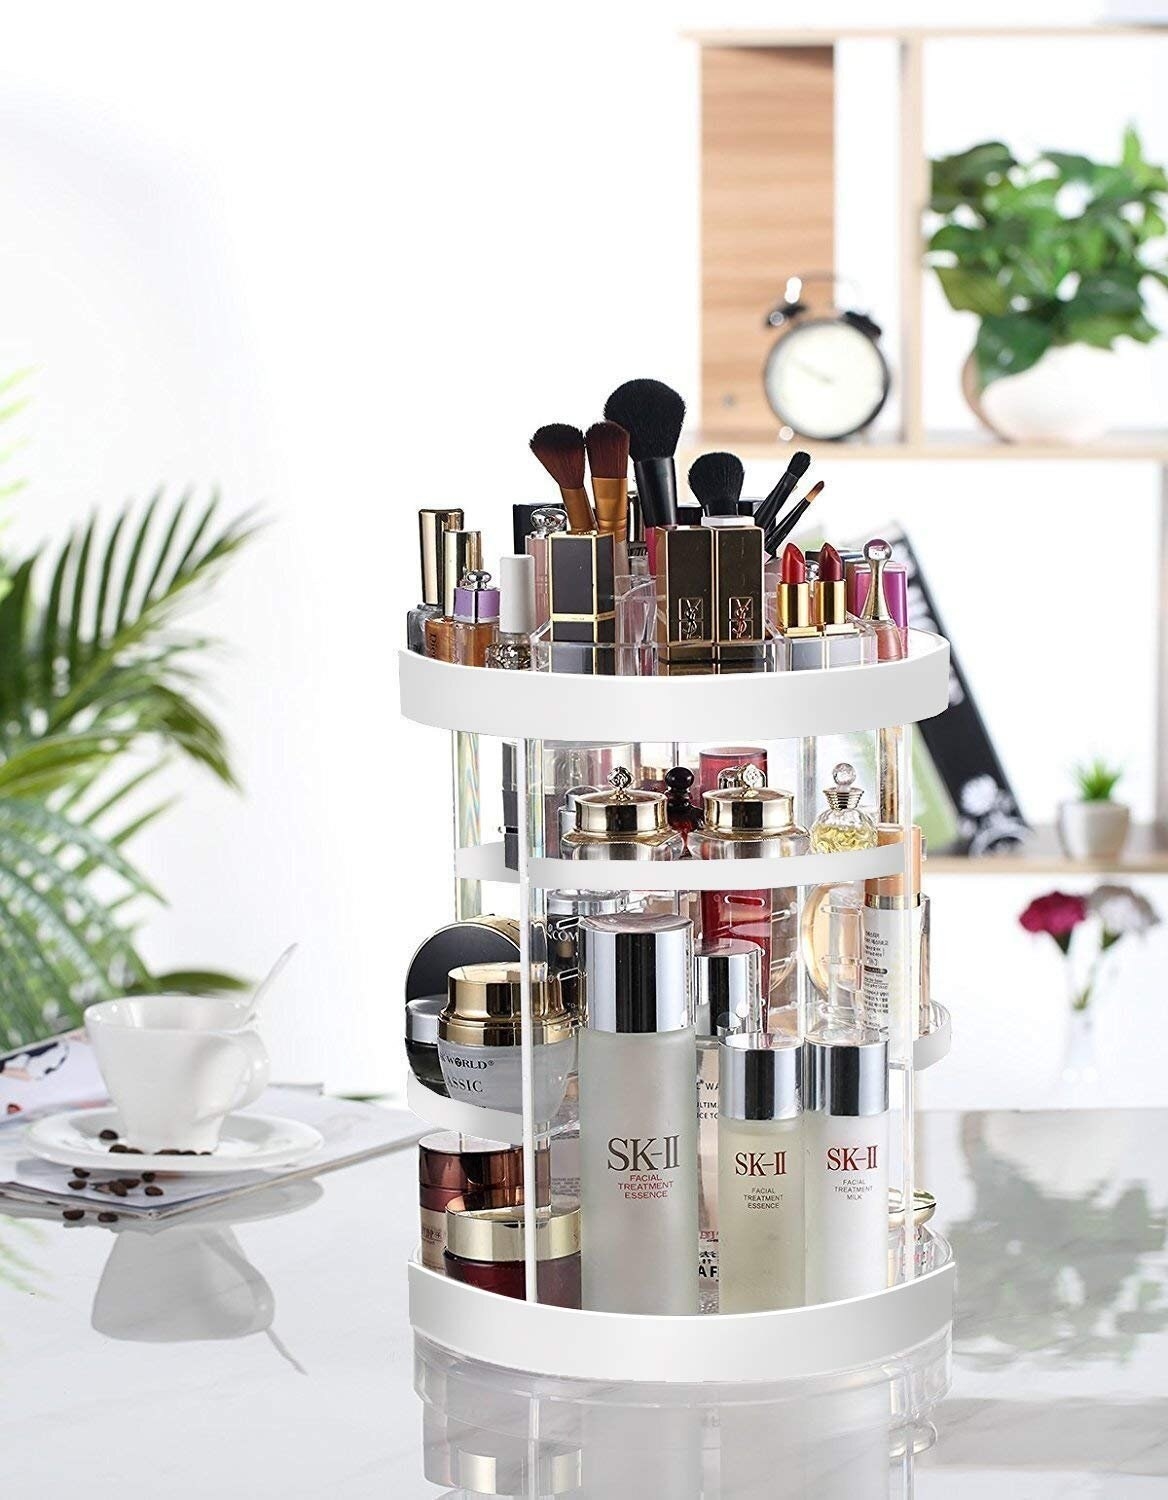 A circular item filled with makeup, with two shelves filled with cosmetics